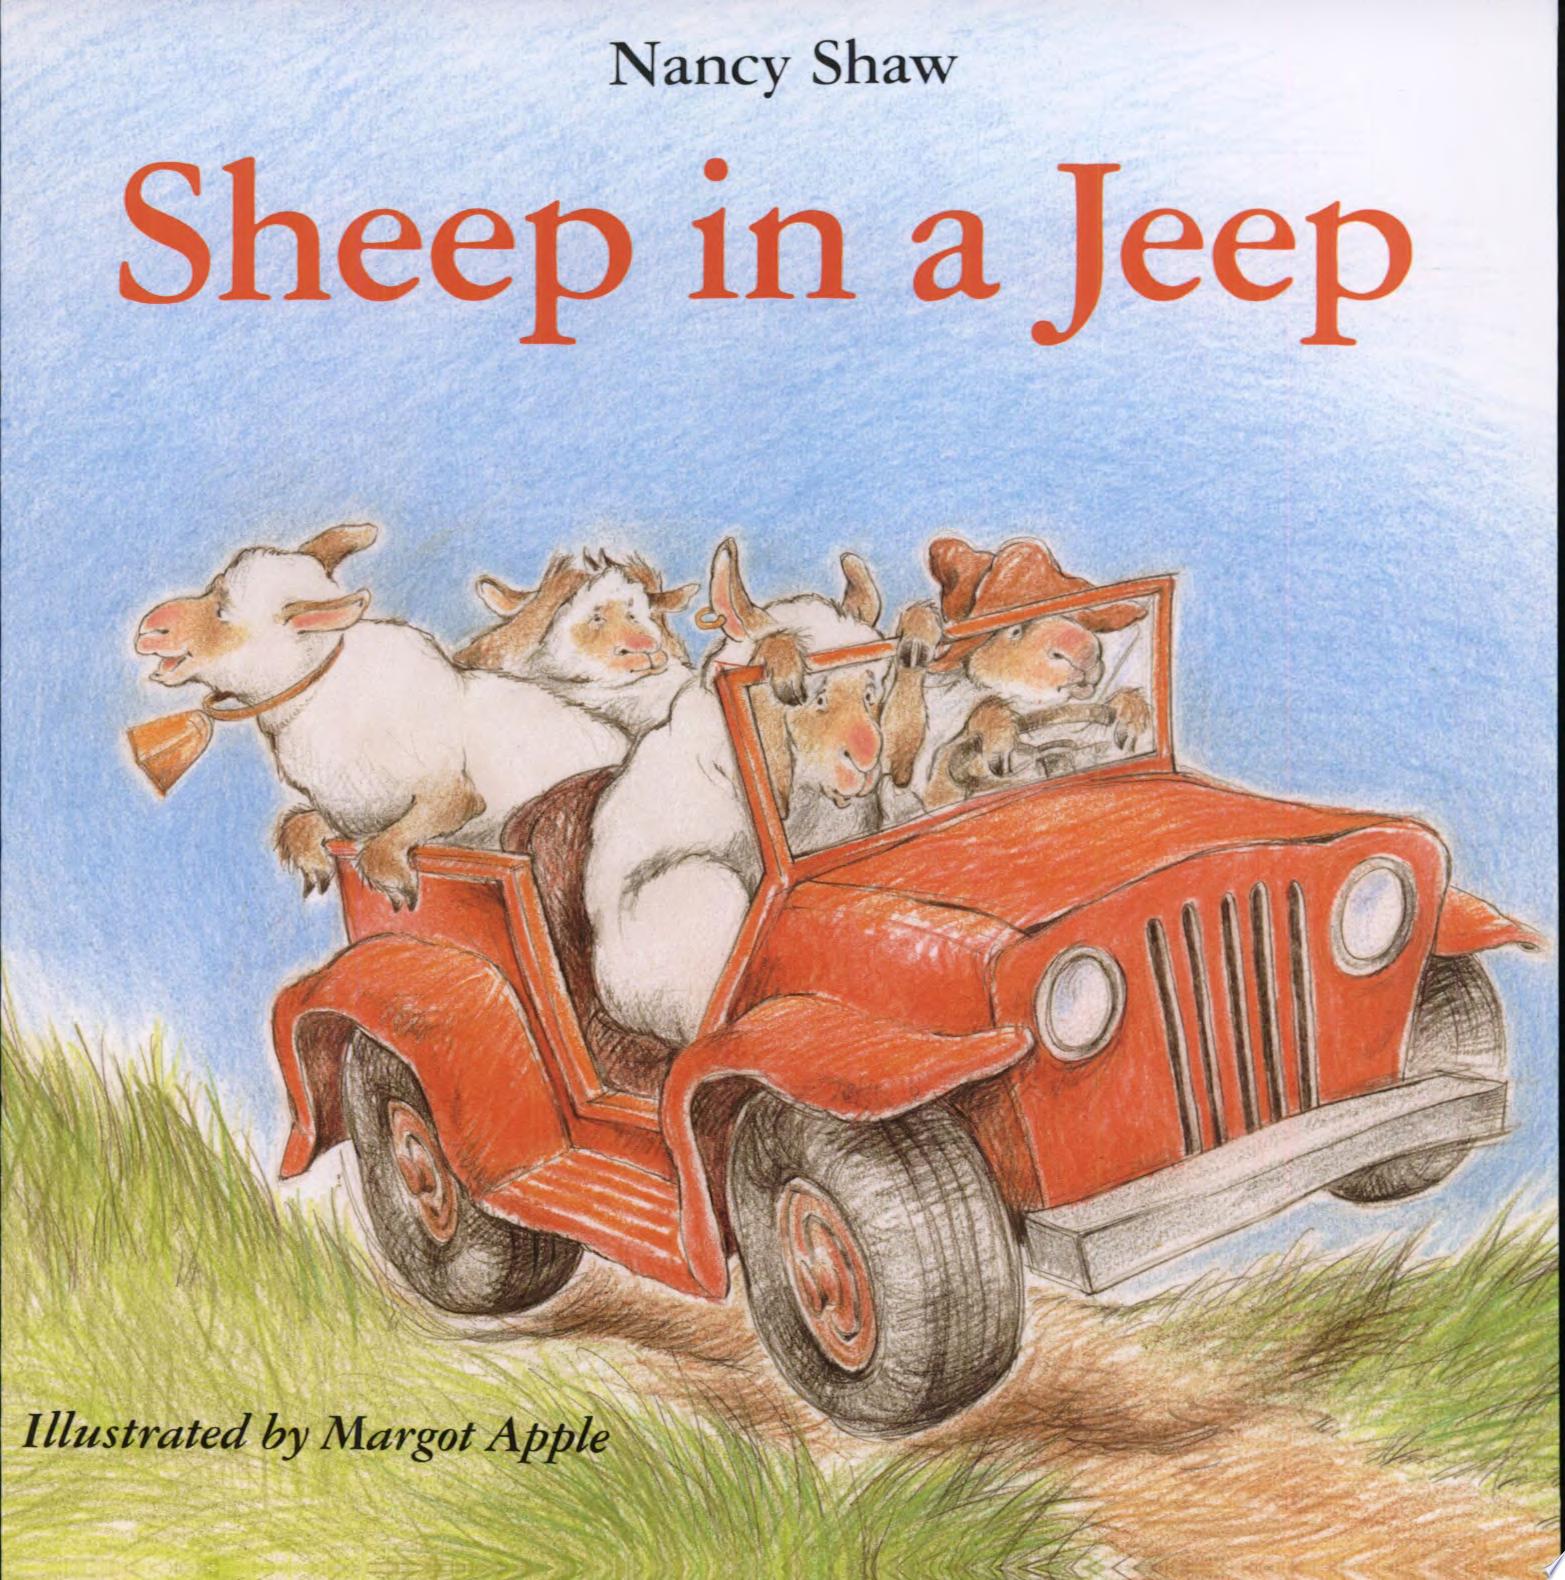 Image for "Sheep in a Jeep"